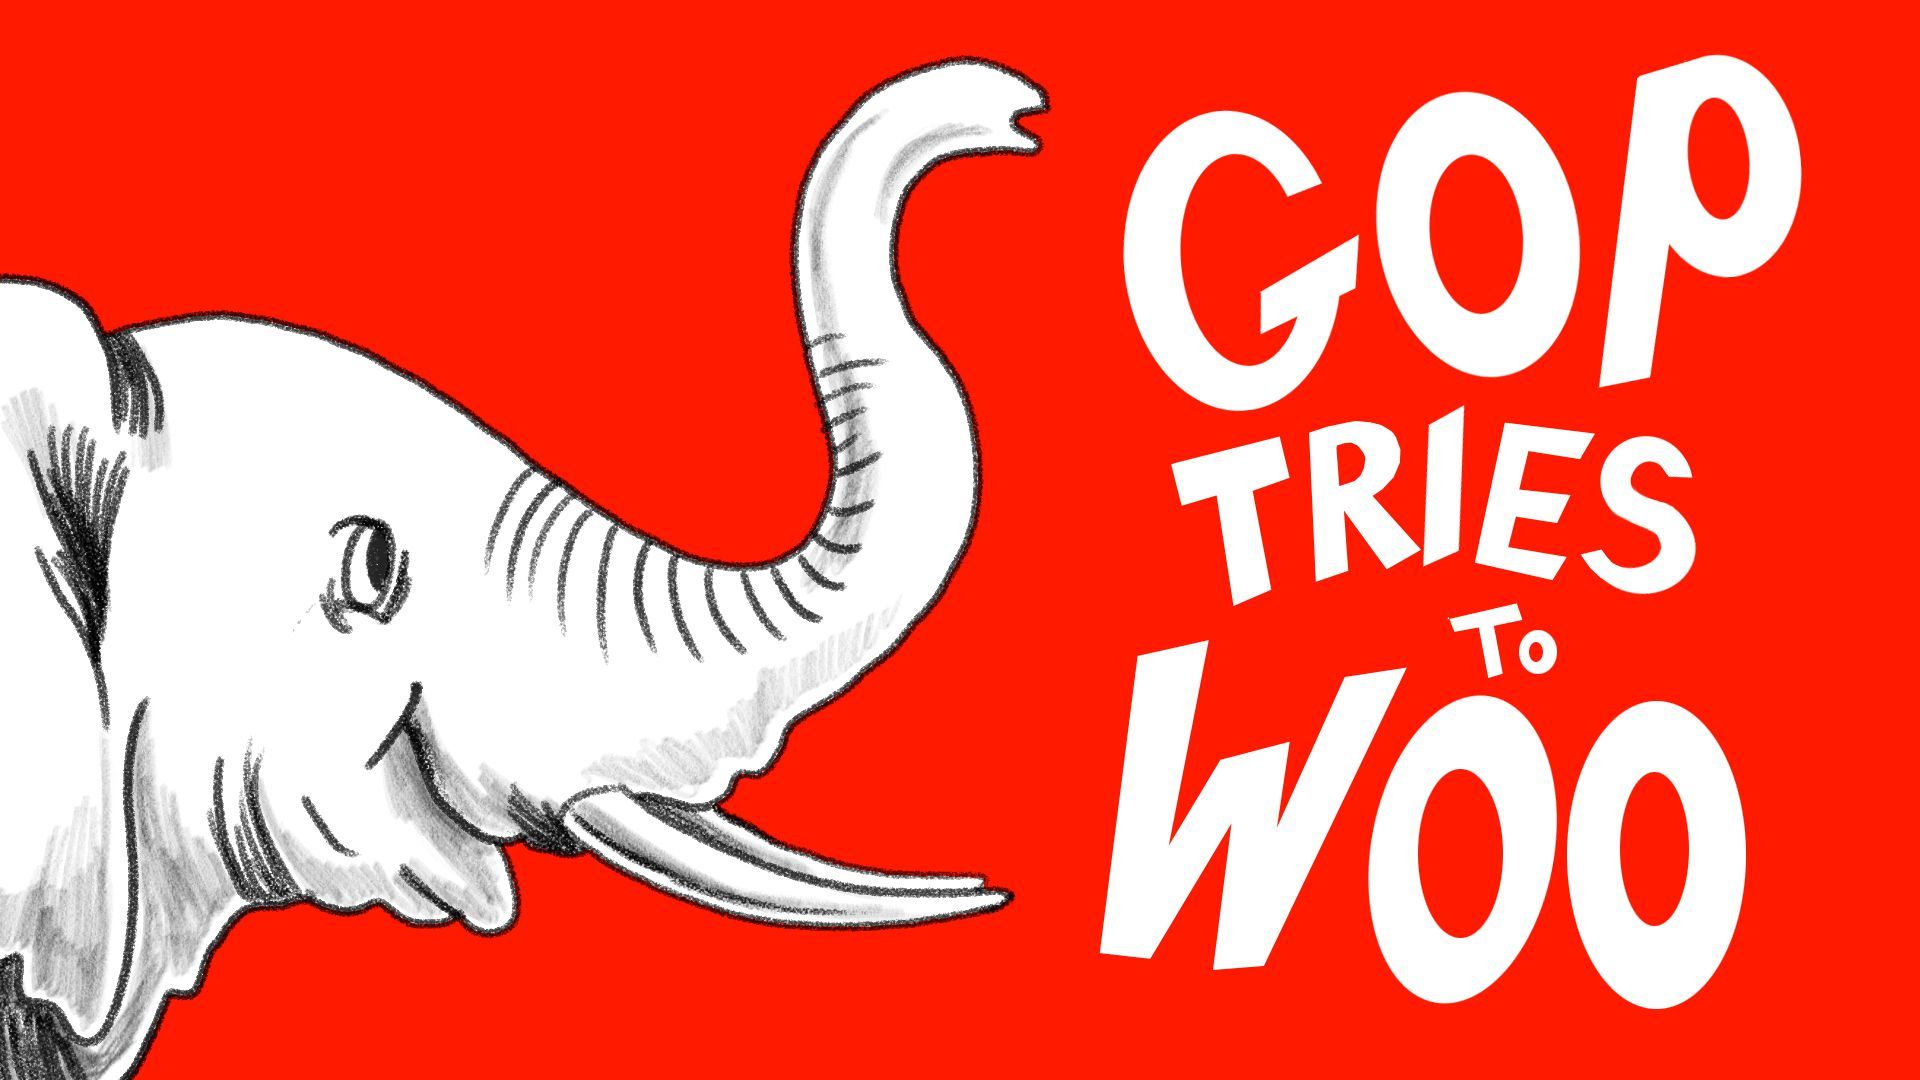 Illustration of a parodied Dr. Seuss cover with the title "GOP Tries to Woo"